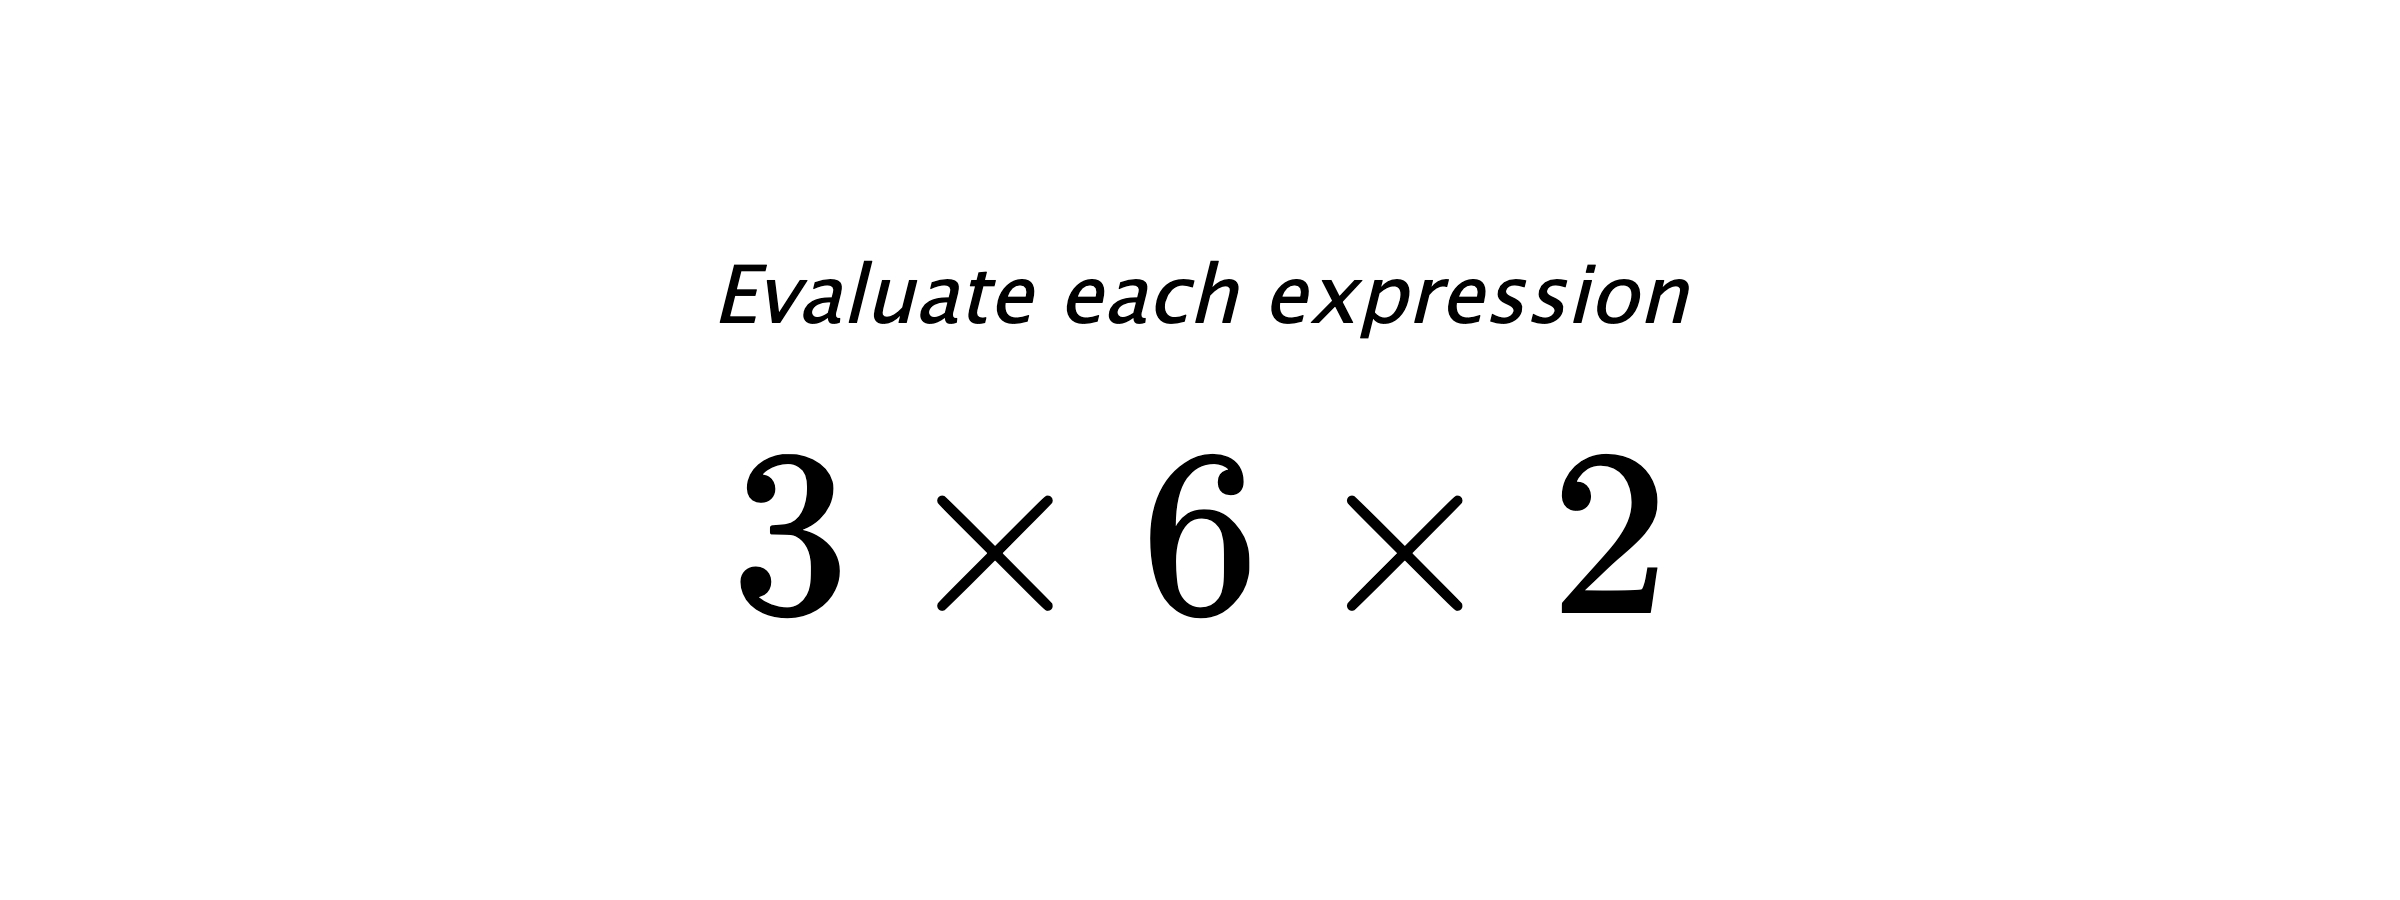 Evaluate each expression $ 3 \times 6 \times 2 $